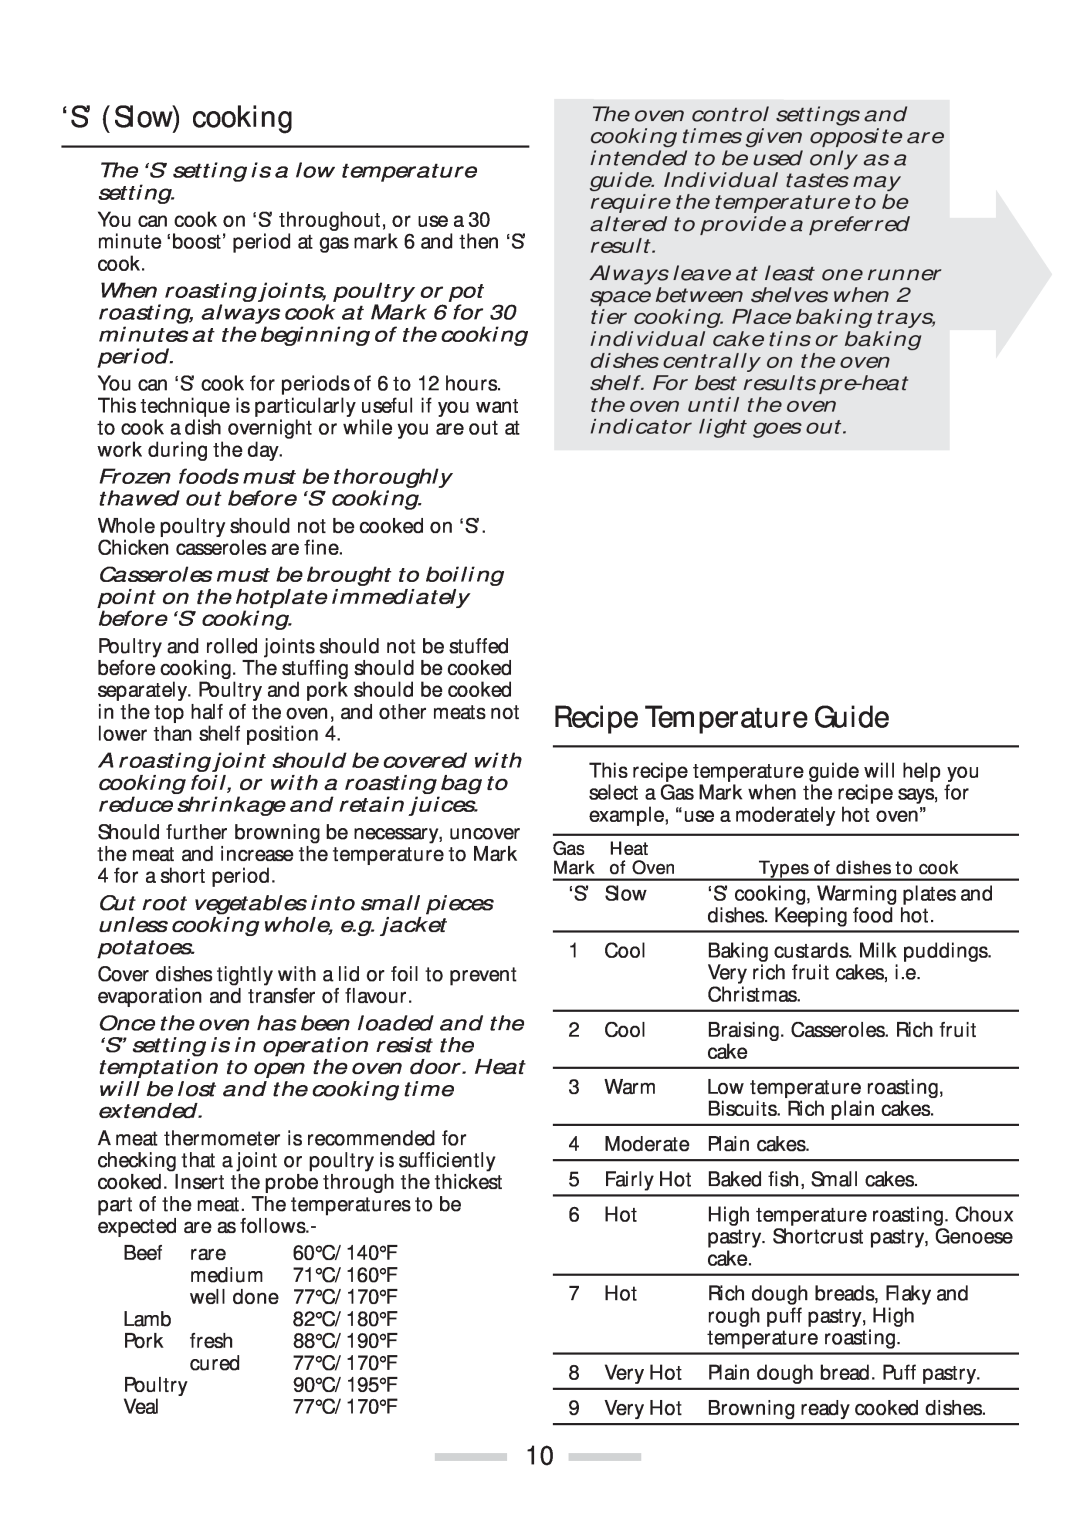 Rangemaster 110 installation instructions ‘S’ Slow cooking, Recipe Temperature Guide 